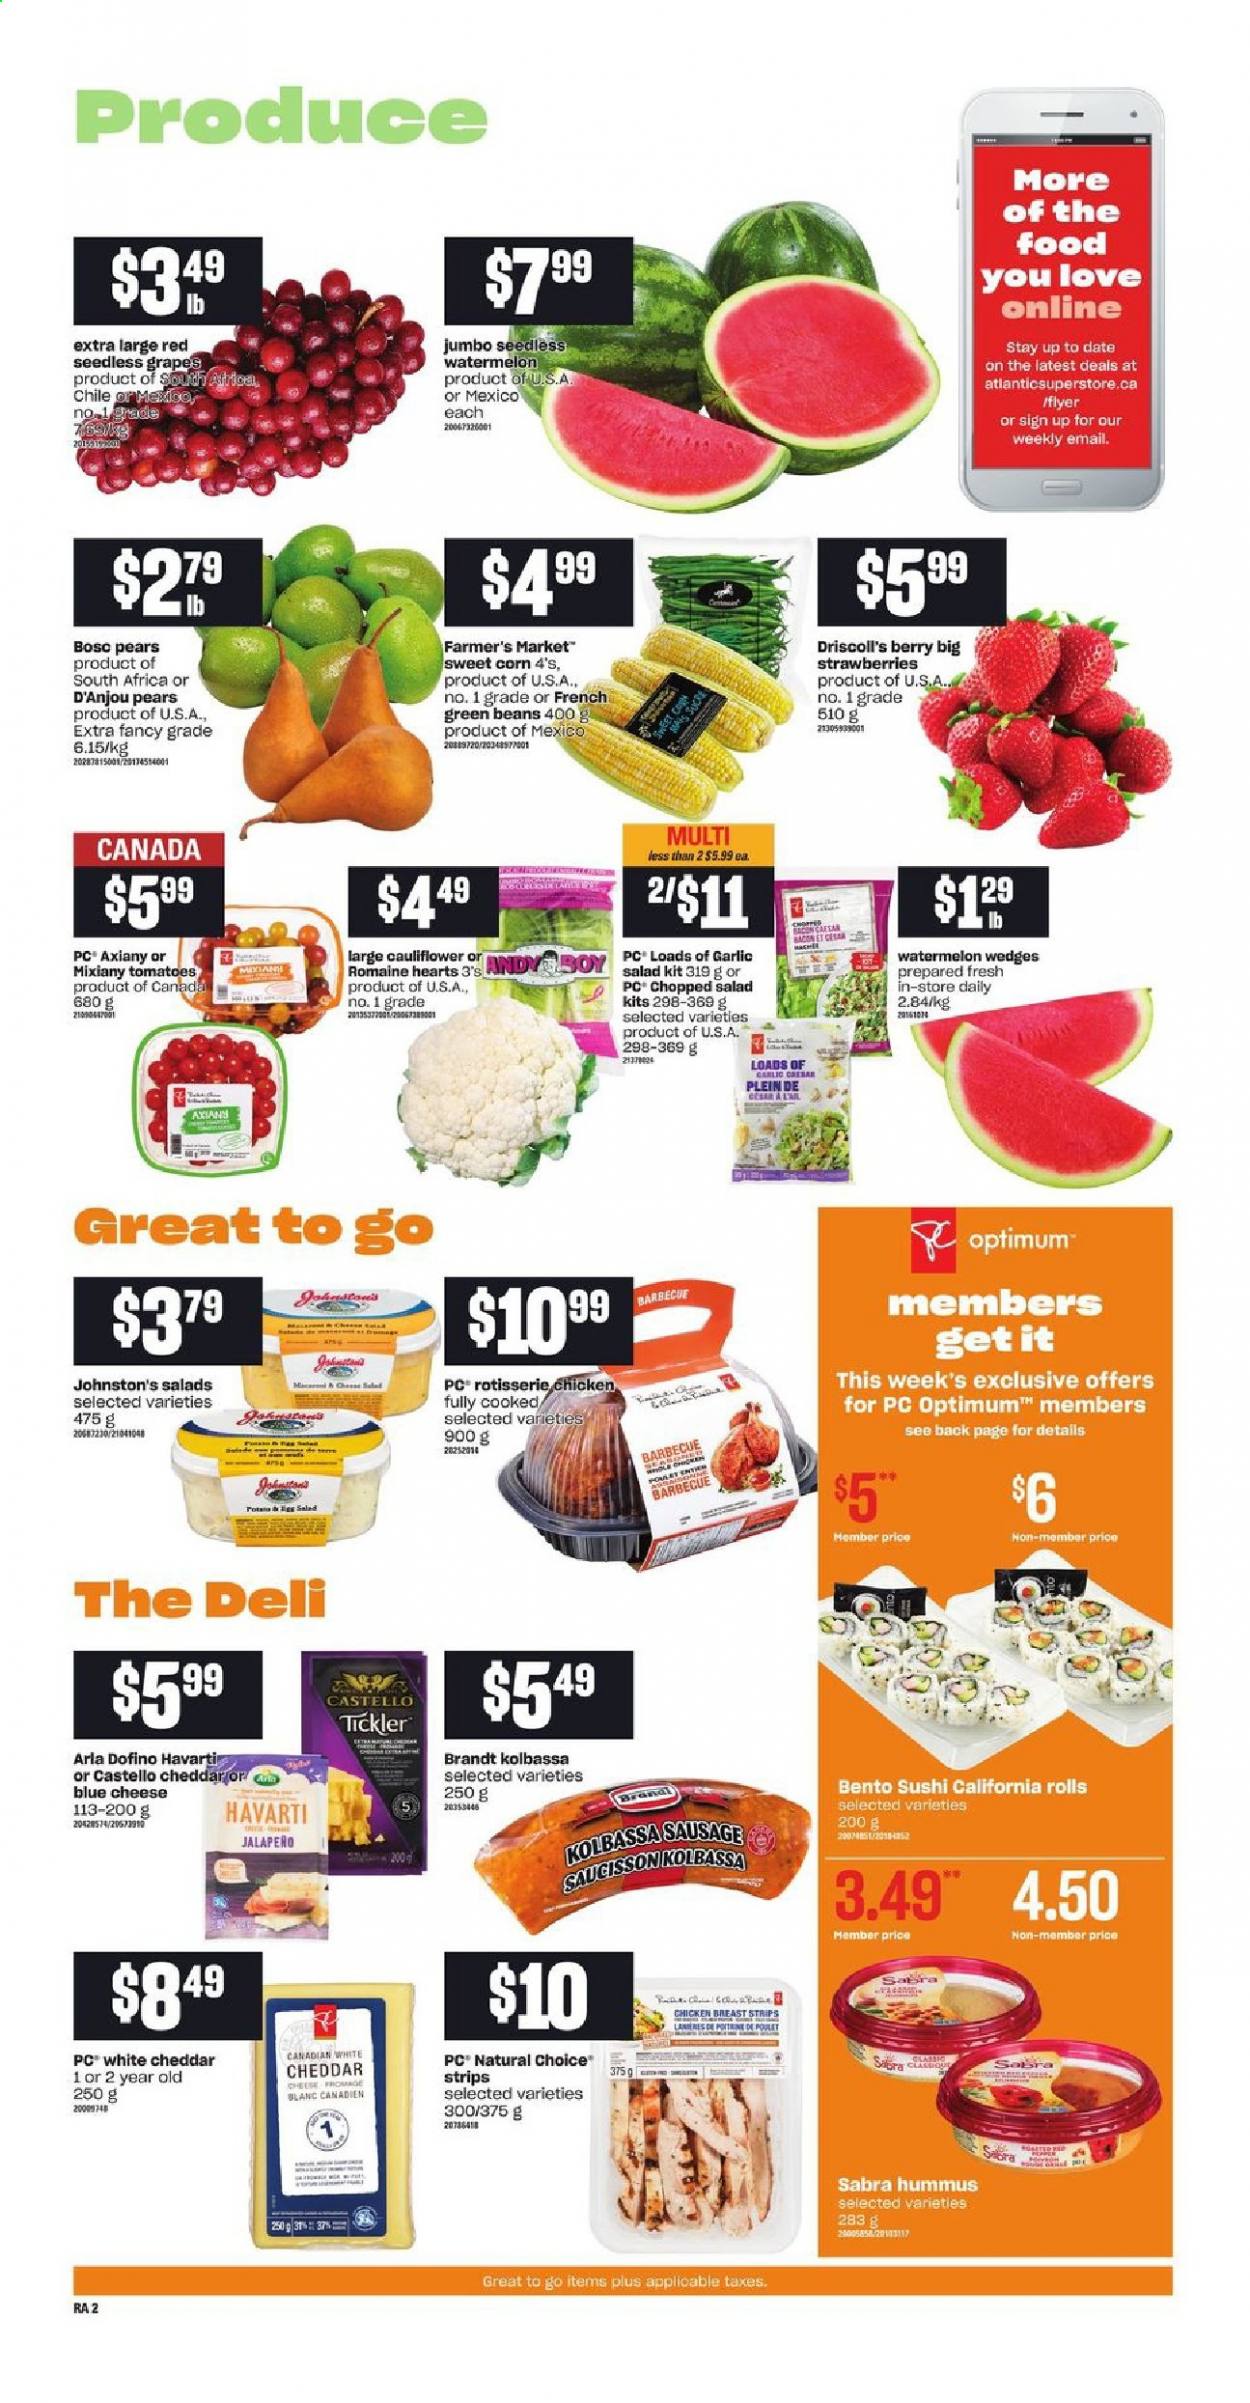 thumbnail - Atlantic Superstore Flyer - May 27, 2021 - June 02, 2021 - Sales products - beans, cauliflower, corn, garlic, green beans, tomatoes, salad, jalapeño, sweet corn, chopped salad, grapes, seedless grapes, strawberries, watermelon, pears, chicken roast, bacon, sausage, hummus, blue cheese, Havarti, cheddar, cheese, Arla, eggs, strips, Optimum. Page 3.